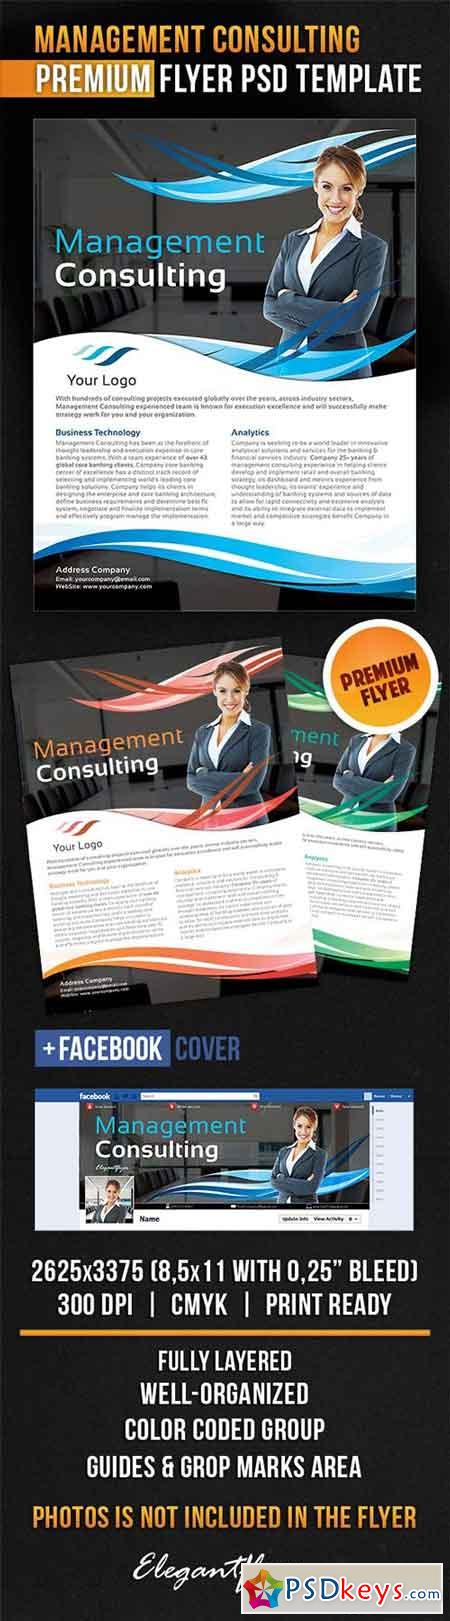 Management Consulting Flyer PSD Template + Facebook Cover